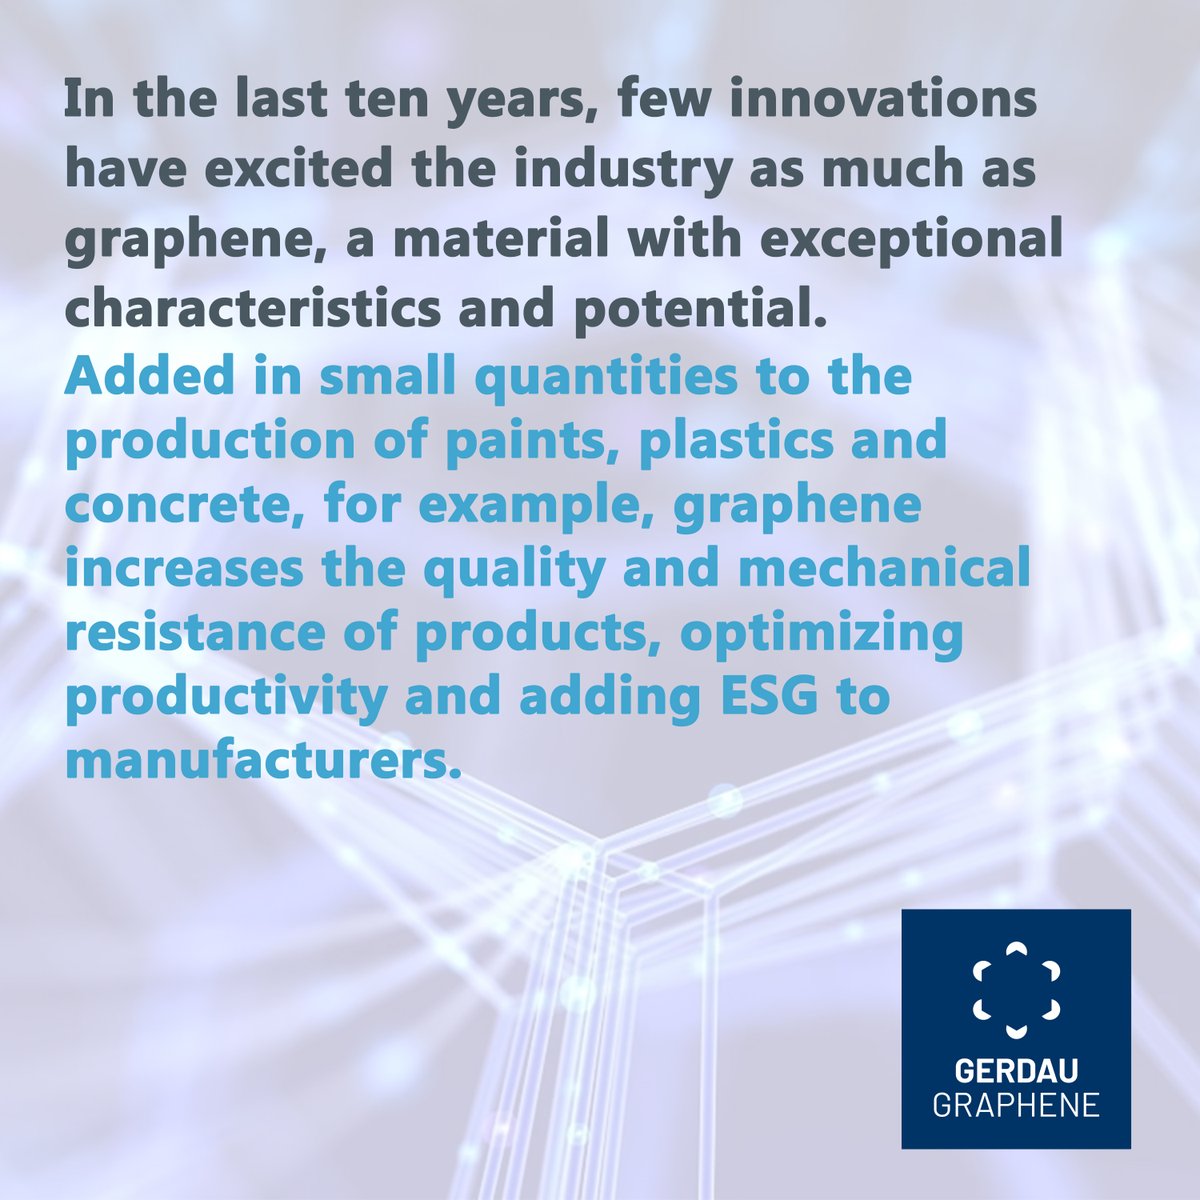 We're a young innovation company transforming #paint, #plastics, and #concrete with nanotech solutions. We optimize production, enhance quality, and prioritize ESG principles. Learn more at info@gerdaugraphene.com. #GerdauGraphene #Nanotech #ESGInnovation